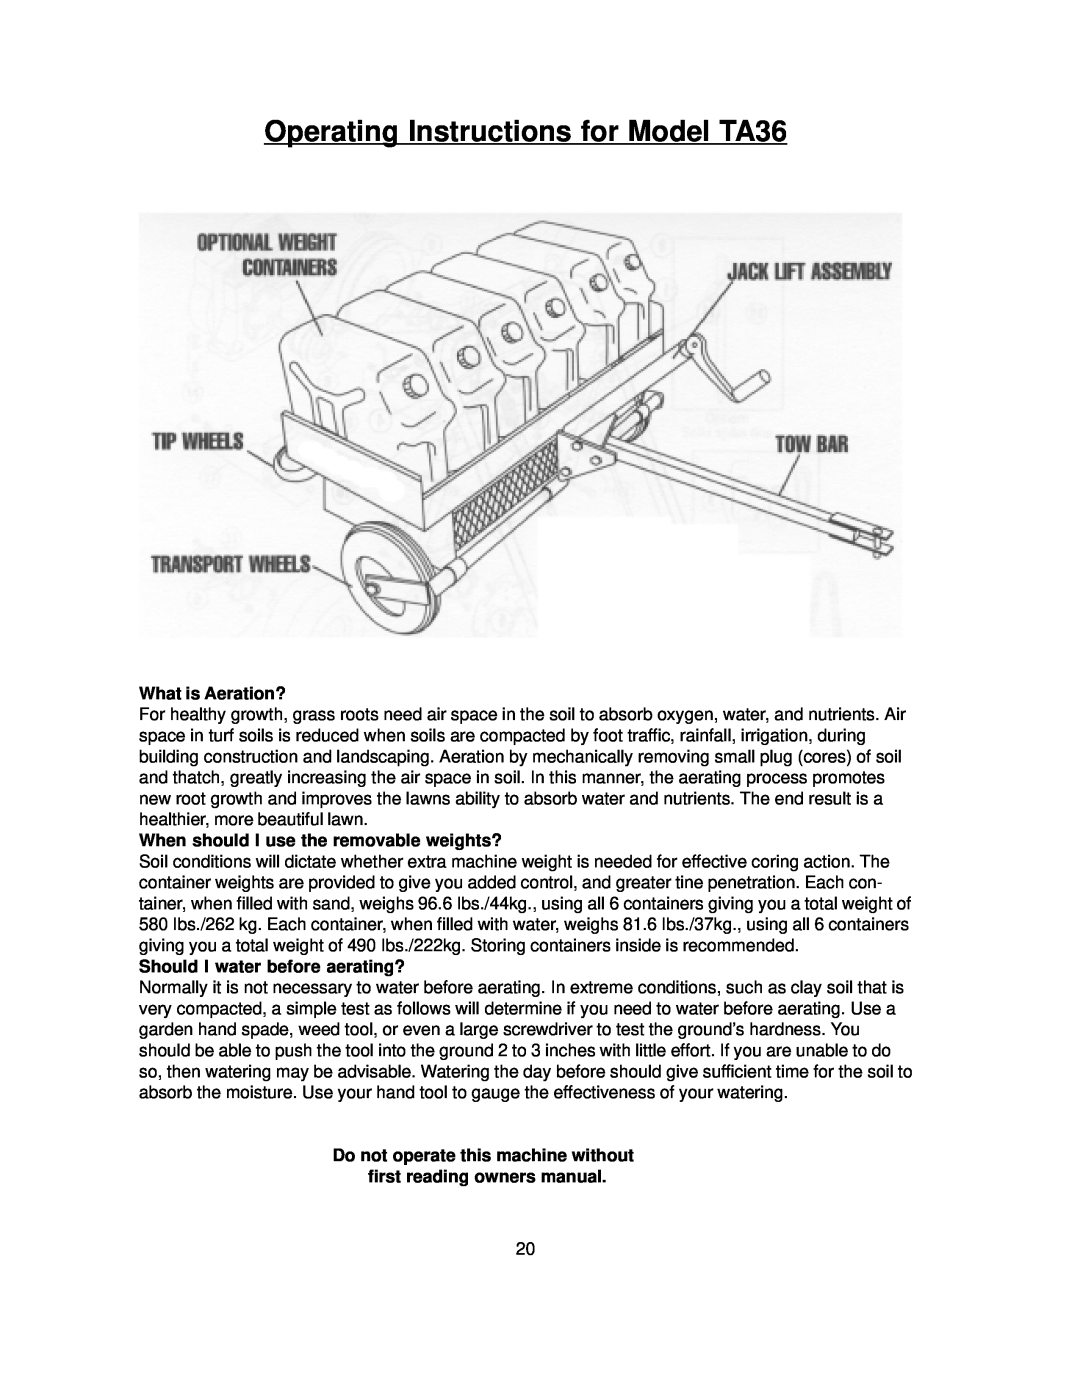 Husqvarna AR19, AR25 Operating Instructions for Model TA36, What is Aeration?, When should I use the removable weights? 